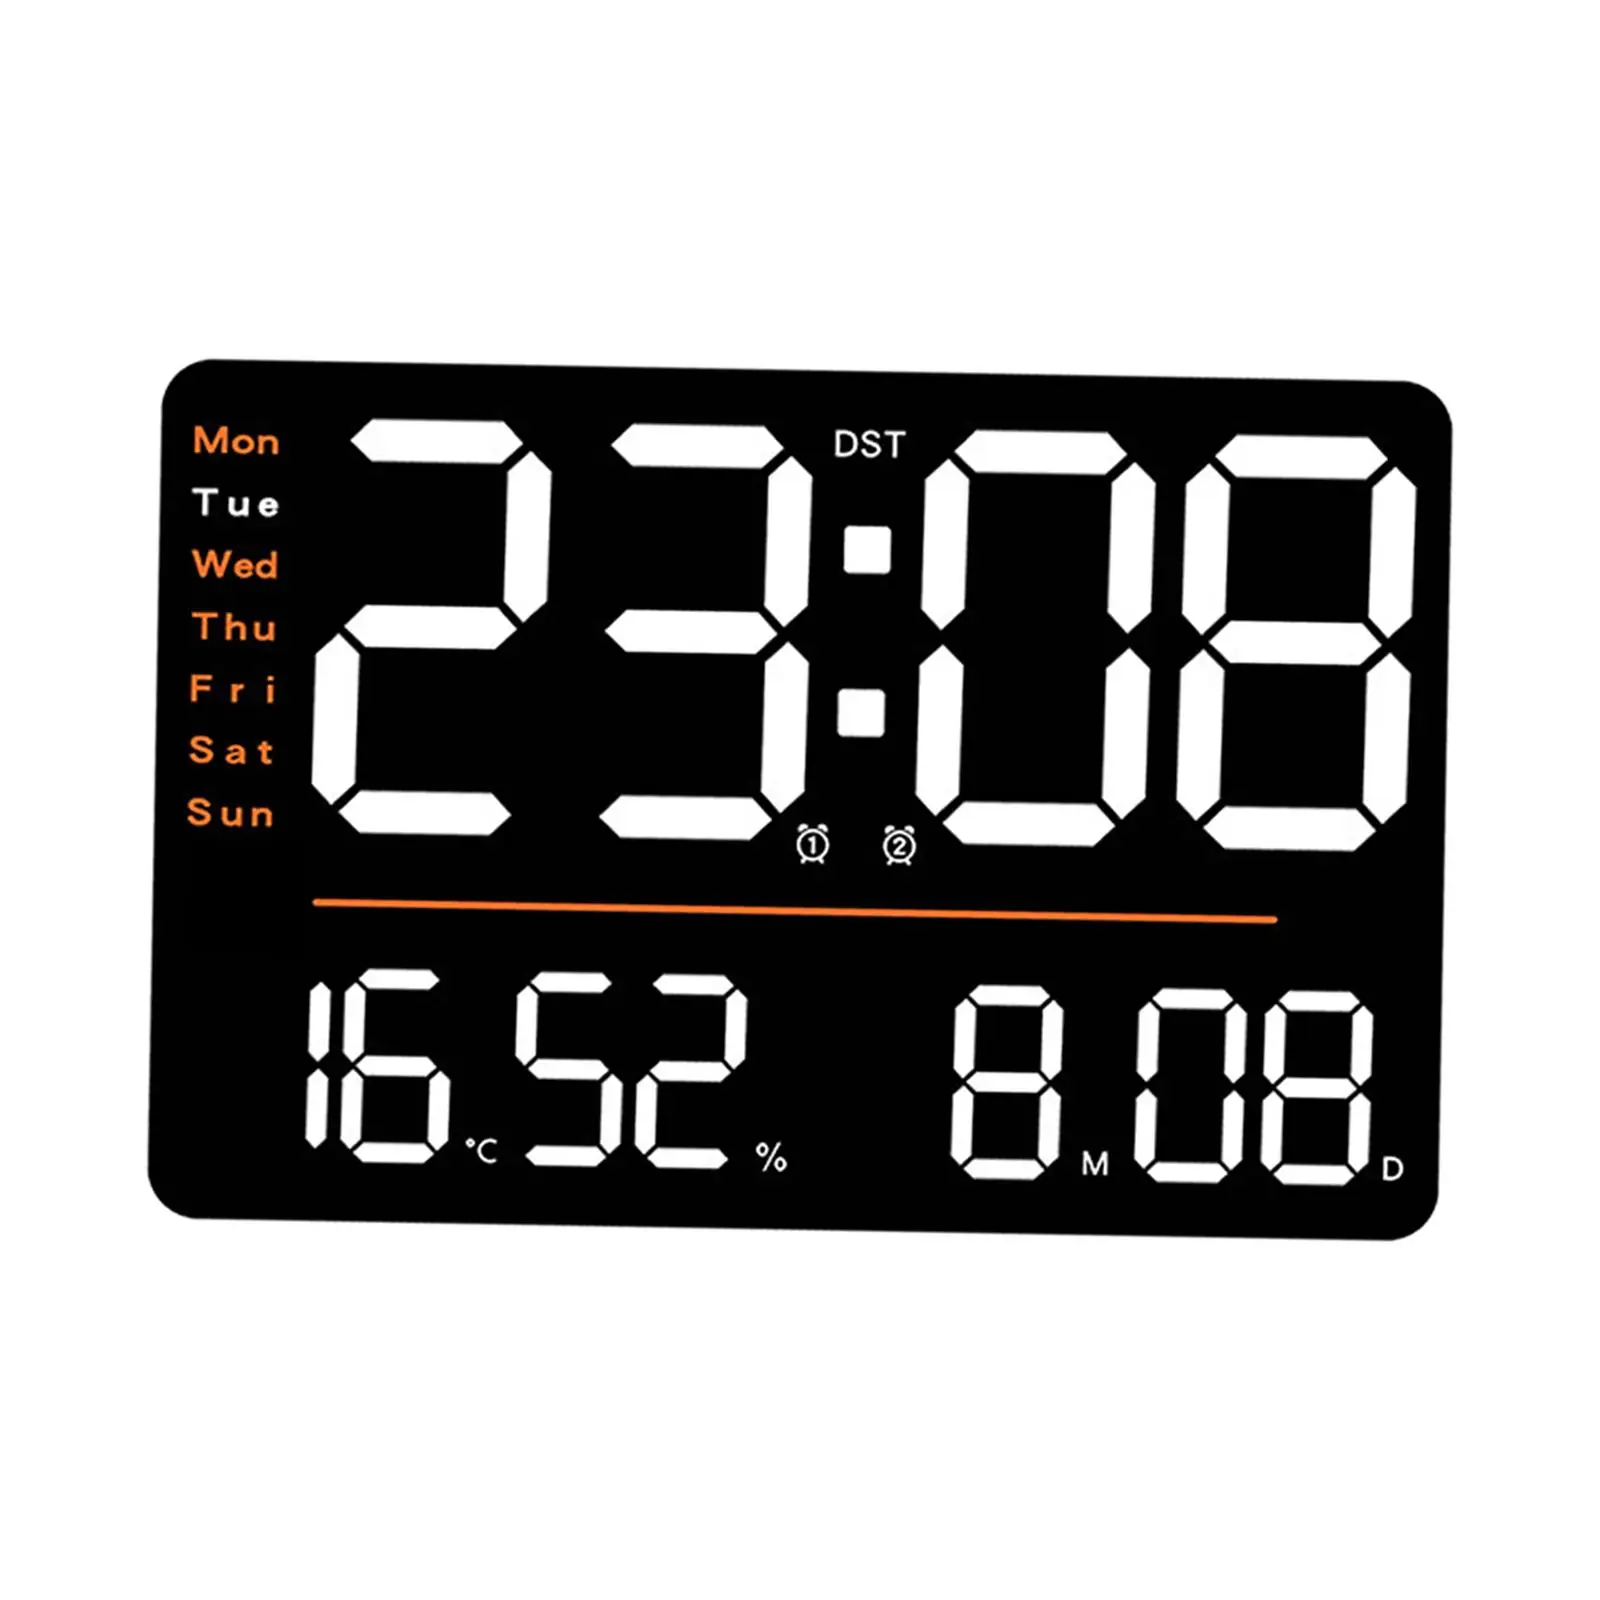 Large Digital Wall Clock 12/24H Time Mode Easy Installation Remote Control with Timer with Date for Office Kitchen Bedroom Home